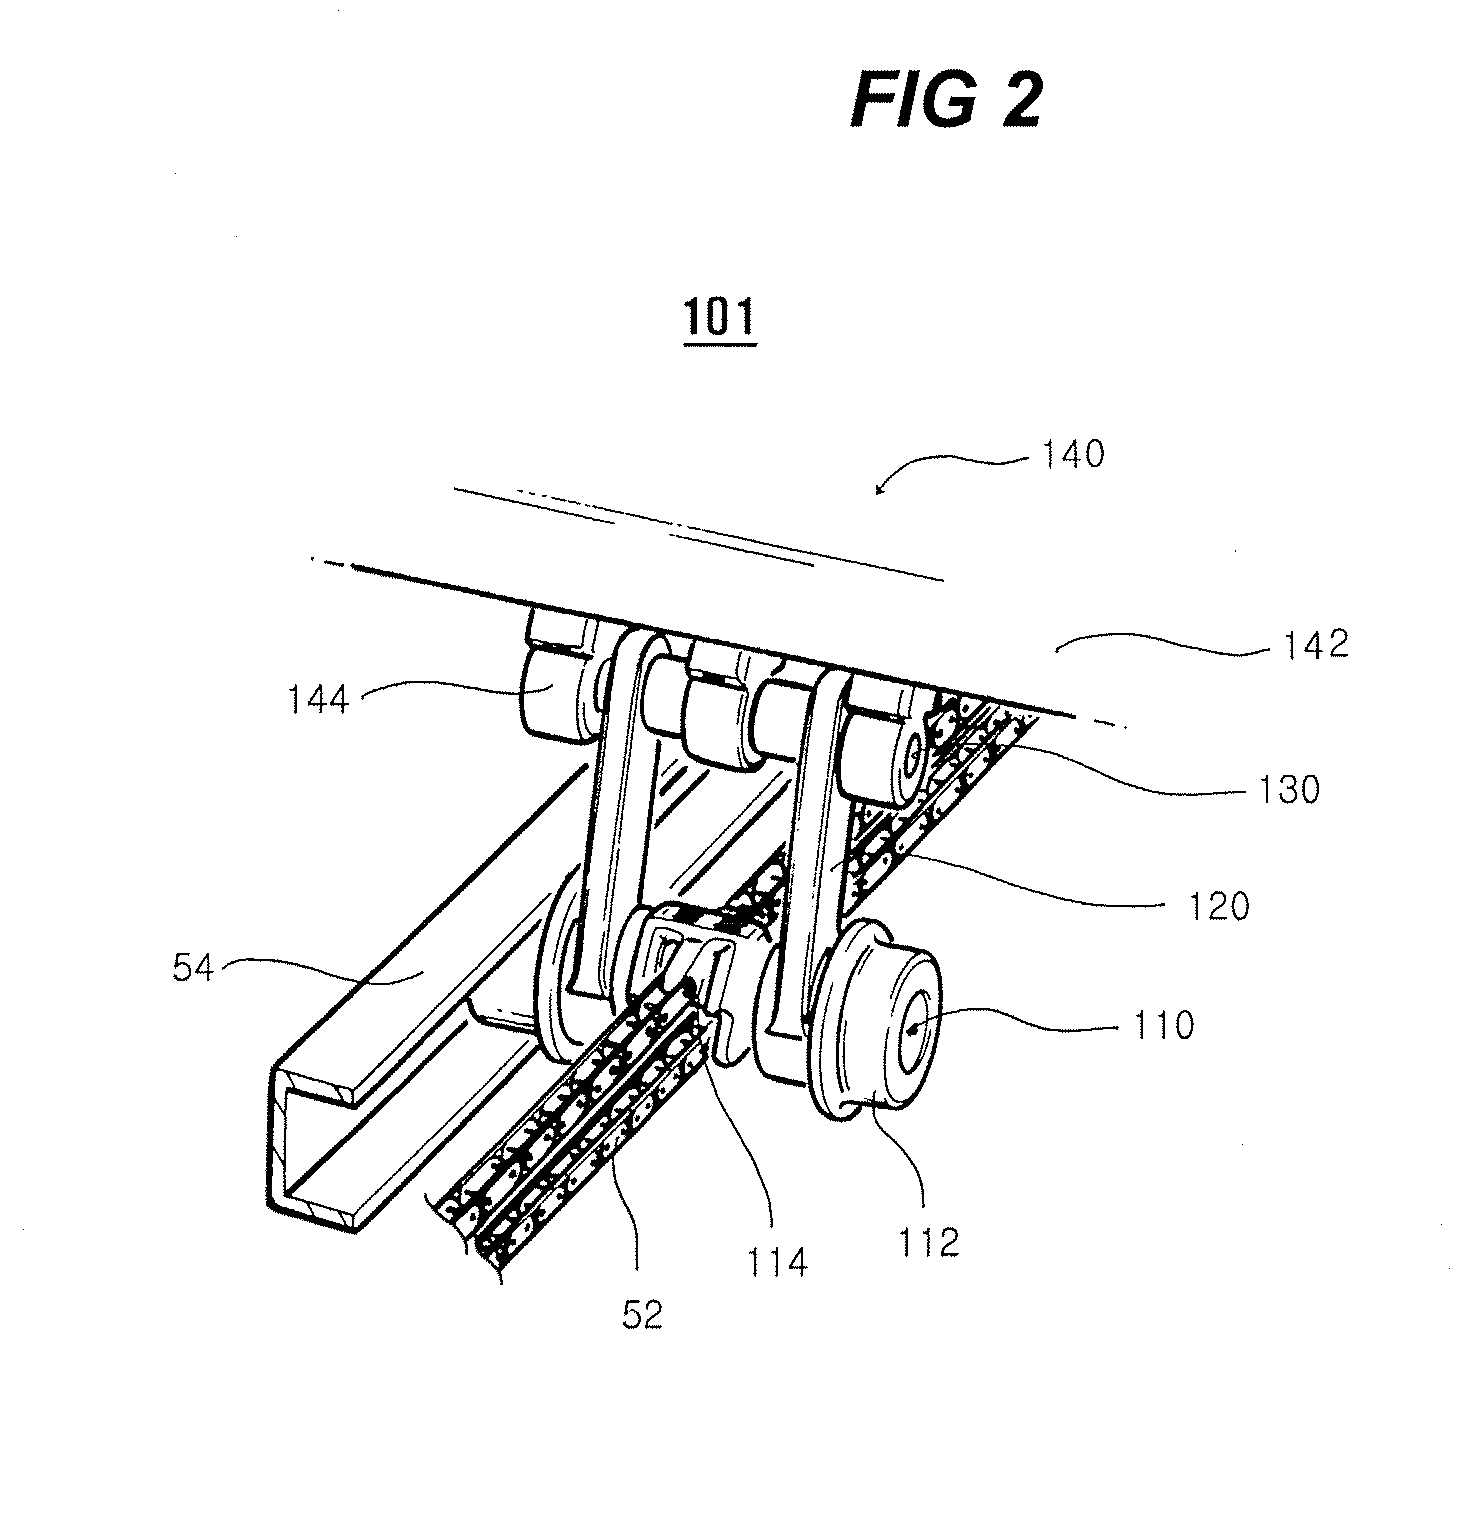 Chain stabilizing device in hyperthermo-therapeutic apparatus and method of using the same